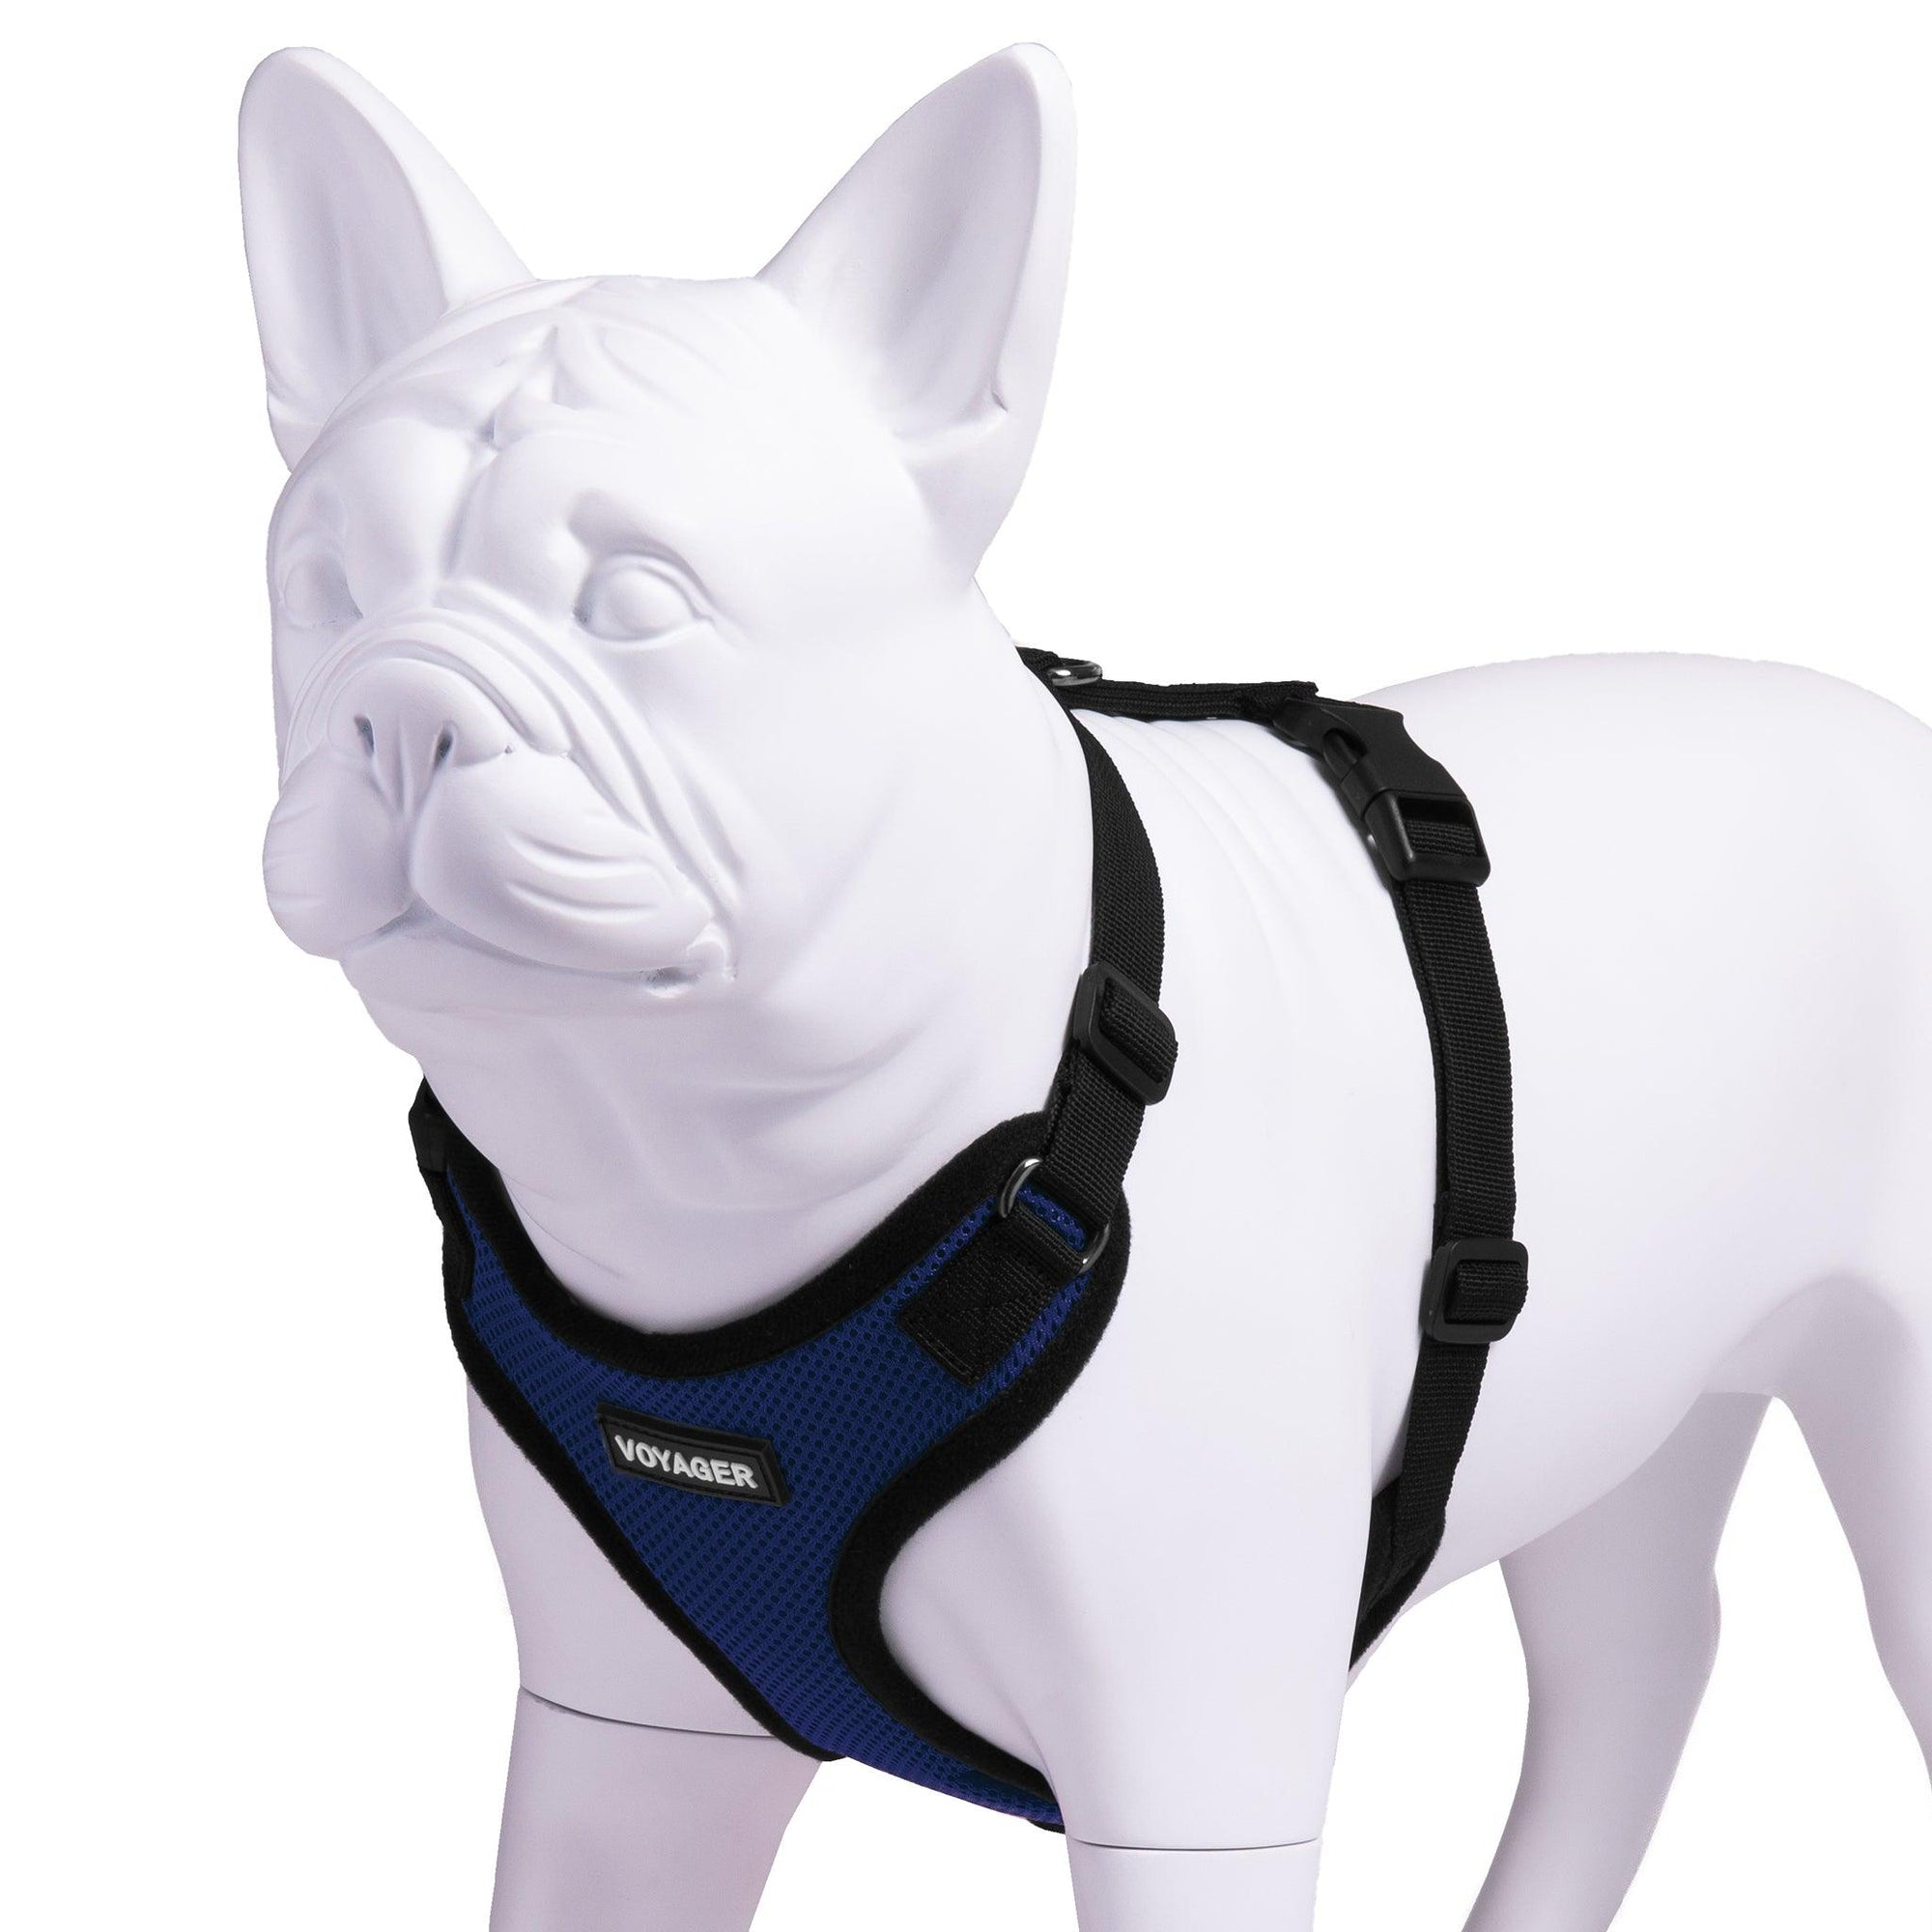 VOYAGER Step-In Lock Dog Harness in Royal Blue with Black Trim and Webbing - Expanded